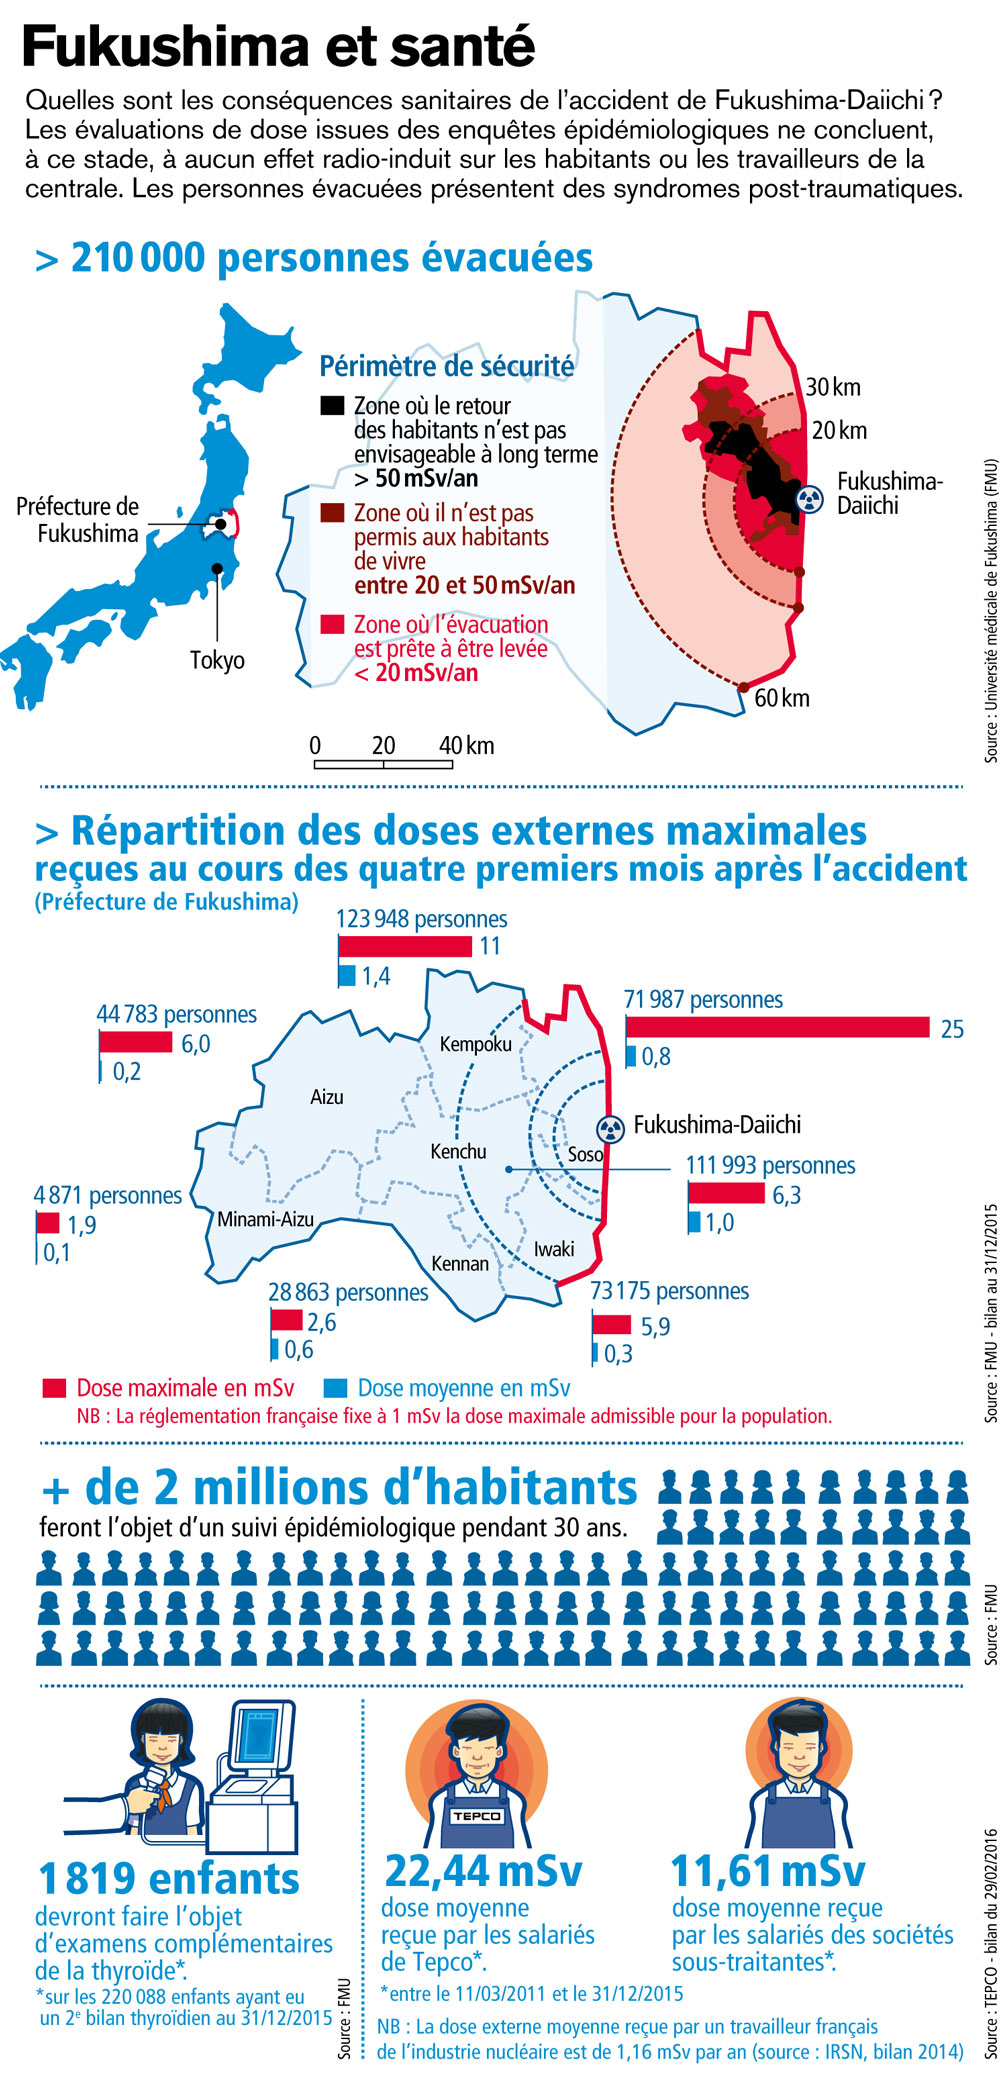 http://www.irsn.fr/FR/connaissances/Installations_nucleaires/Les-accidents-nucleaires/accident-fukushima-2011/fukushima-2016/PublishingImages/IRSN_Infographie-Fukushima-Sante_201607.jpg